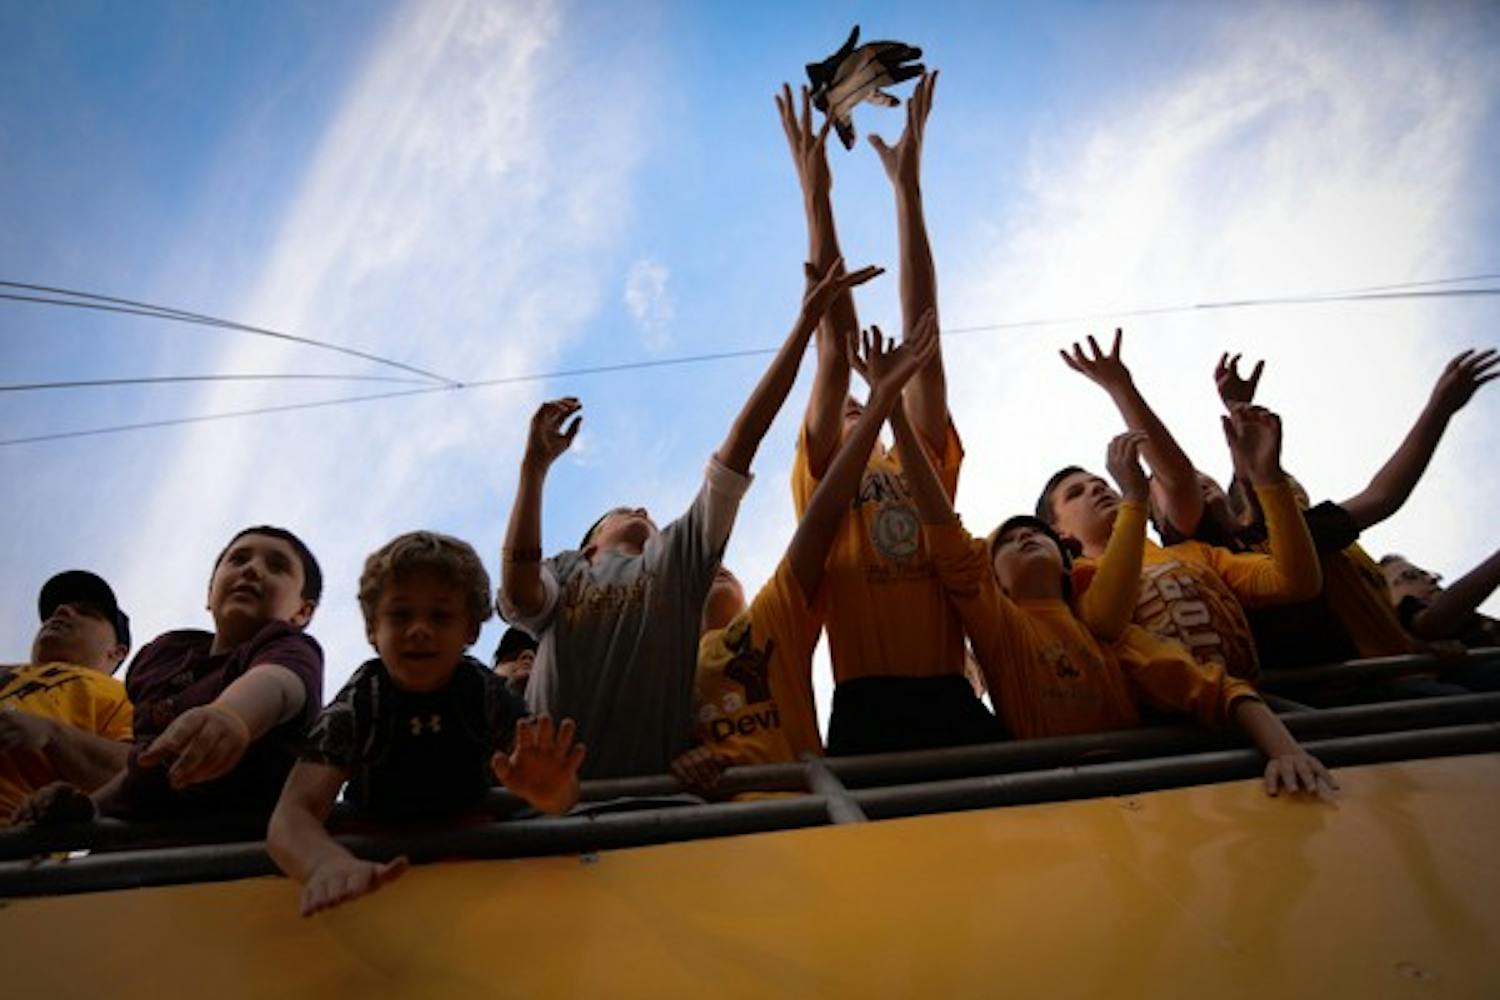 Young fans reach out for an ASU player's glove after Saturday's game. (Photo by Aaron Lavinsky)